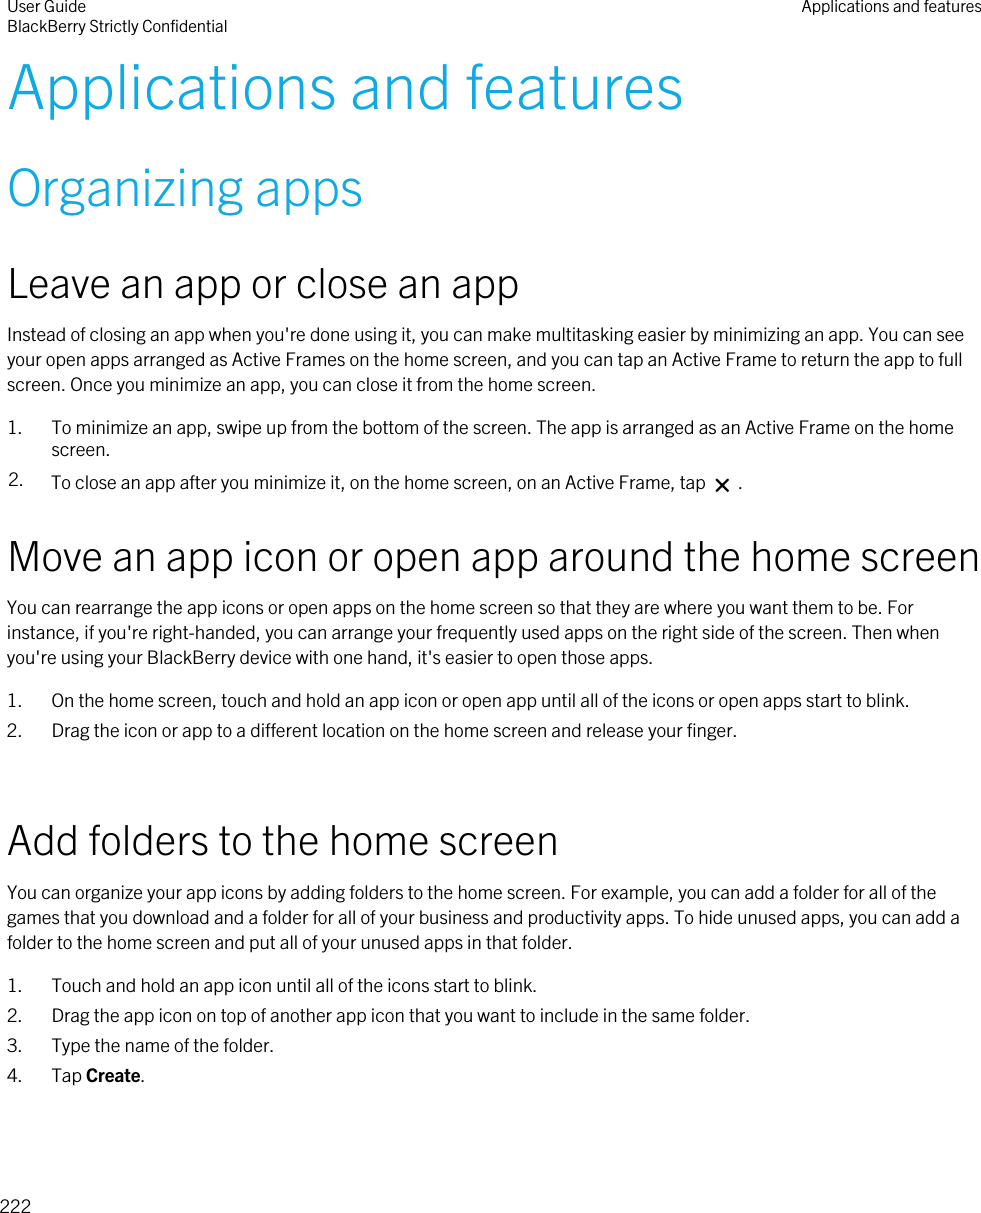 Applications and featuresOrganizing appsLeave an app or close an appInstead of closing an app when you&apos;re done using it, you can make multitasking easier by minimizing an app. You can see your open apps arranged as Active Frames on the home screen, and you can tap an Active Frame to return the app to full screen. Once you minimize an app, you can close it from the home screen.1. To minimize an app, swipe up from the bottom of the screen. The app is arranged as an Active Frame on the home screen.2. To close an app after you minimize it, on the home screen, on an Active Frame, tap   .Move an app icon or open app around the home screenYou can rearrange the app icons or open apps on the home screen so that they are where you want them to be. For instance, if you&apos;re right-handed, you can arrange your frequently used apps on the right side of the screen. Then when you&apos;re using your BlackBerry device with one hand, it&apos;s easier to open those apps.1. On the home screen, touch and hold an app icon or open app until all of the icons or open apps start to blink.2. Drag the icon or app to a different location on the home screen and release your finger.Add folders to the home screenYou can organize your app icons by adding folders to the home screen. For example, you can add a folder for all of the games that you download and a folder for all of your business and productivity apps. To hide unused apps, you can add a folder to the home screen and put all of your unused apps in that folder.1. Touch and hold an app icon until all of the icons start to blink.2. Drag the app icon on top of another app icon that you want to include in the same folder.3. Type the name of the folder.4. Tap Create.User GuideBlackBerry Strictly Confidential Applications and features222